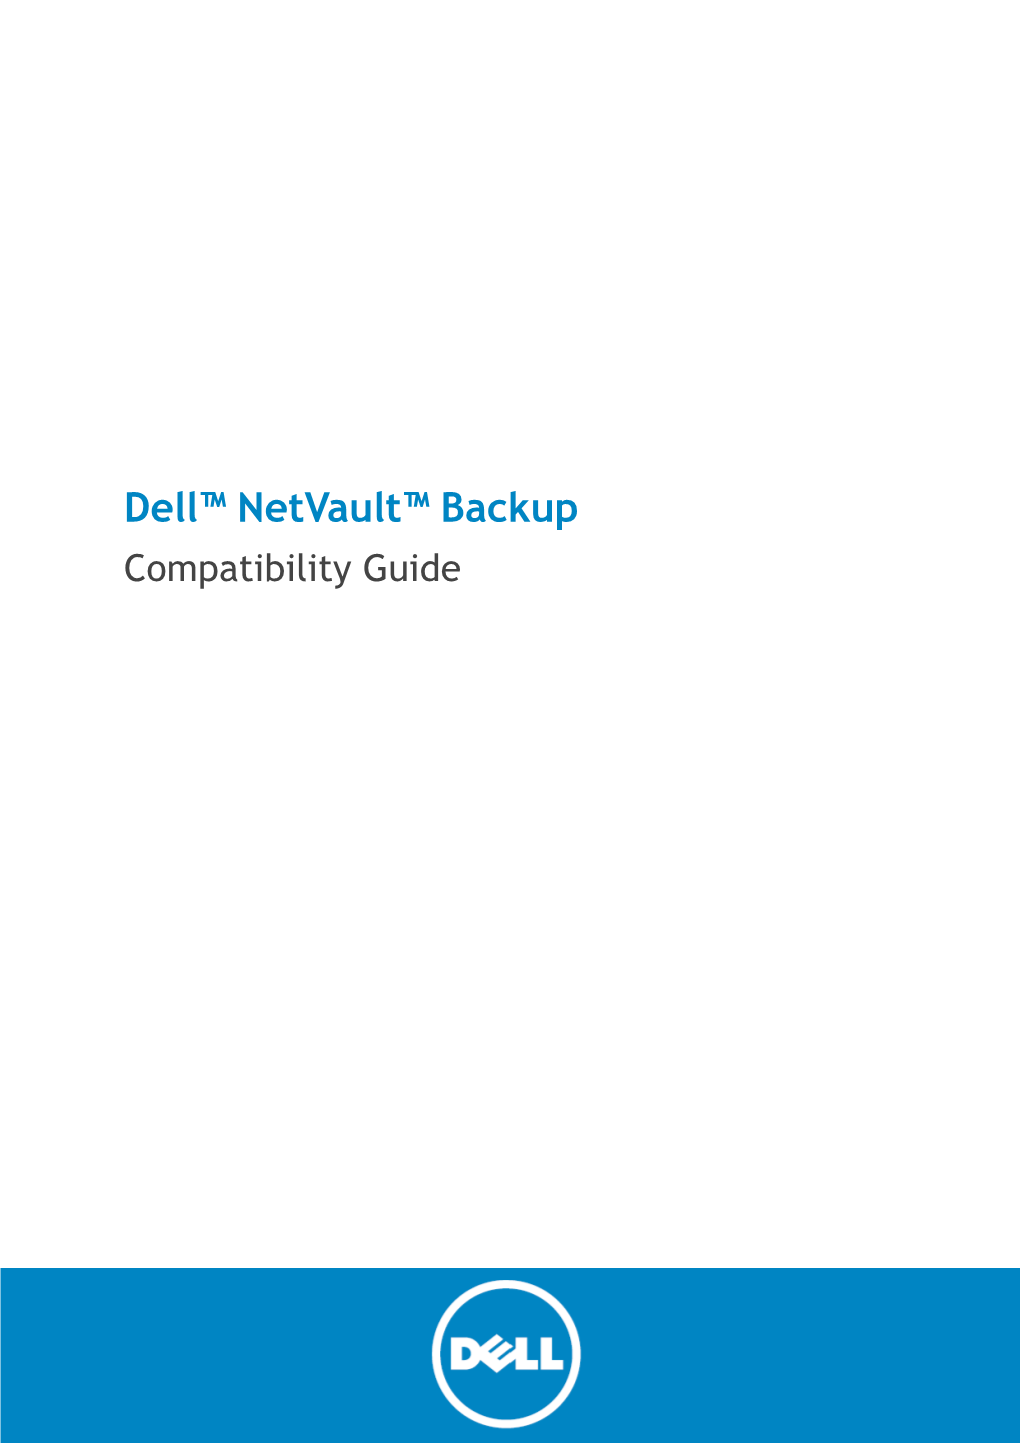 Netvault Backup Compatibility Guide Updated - August 2014, Rev A